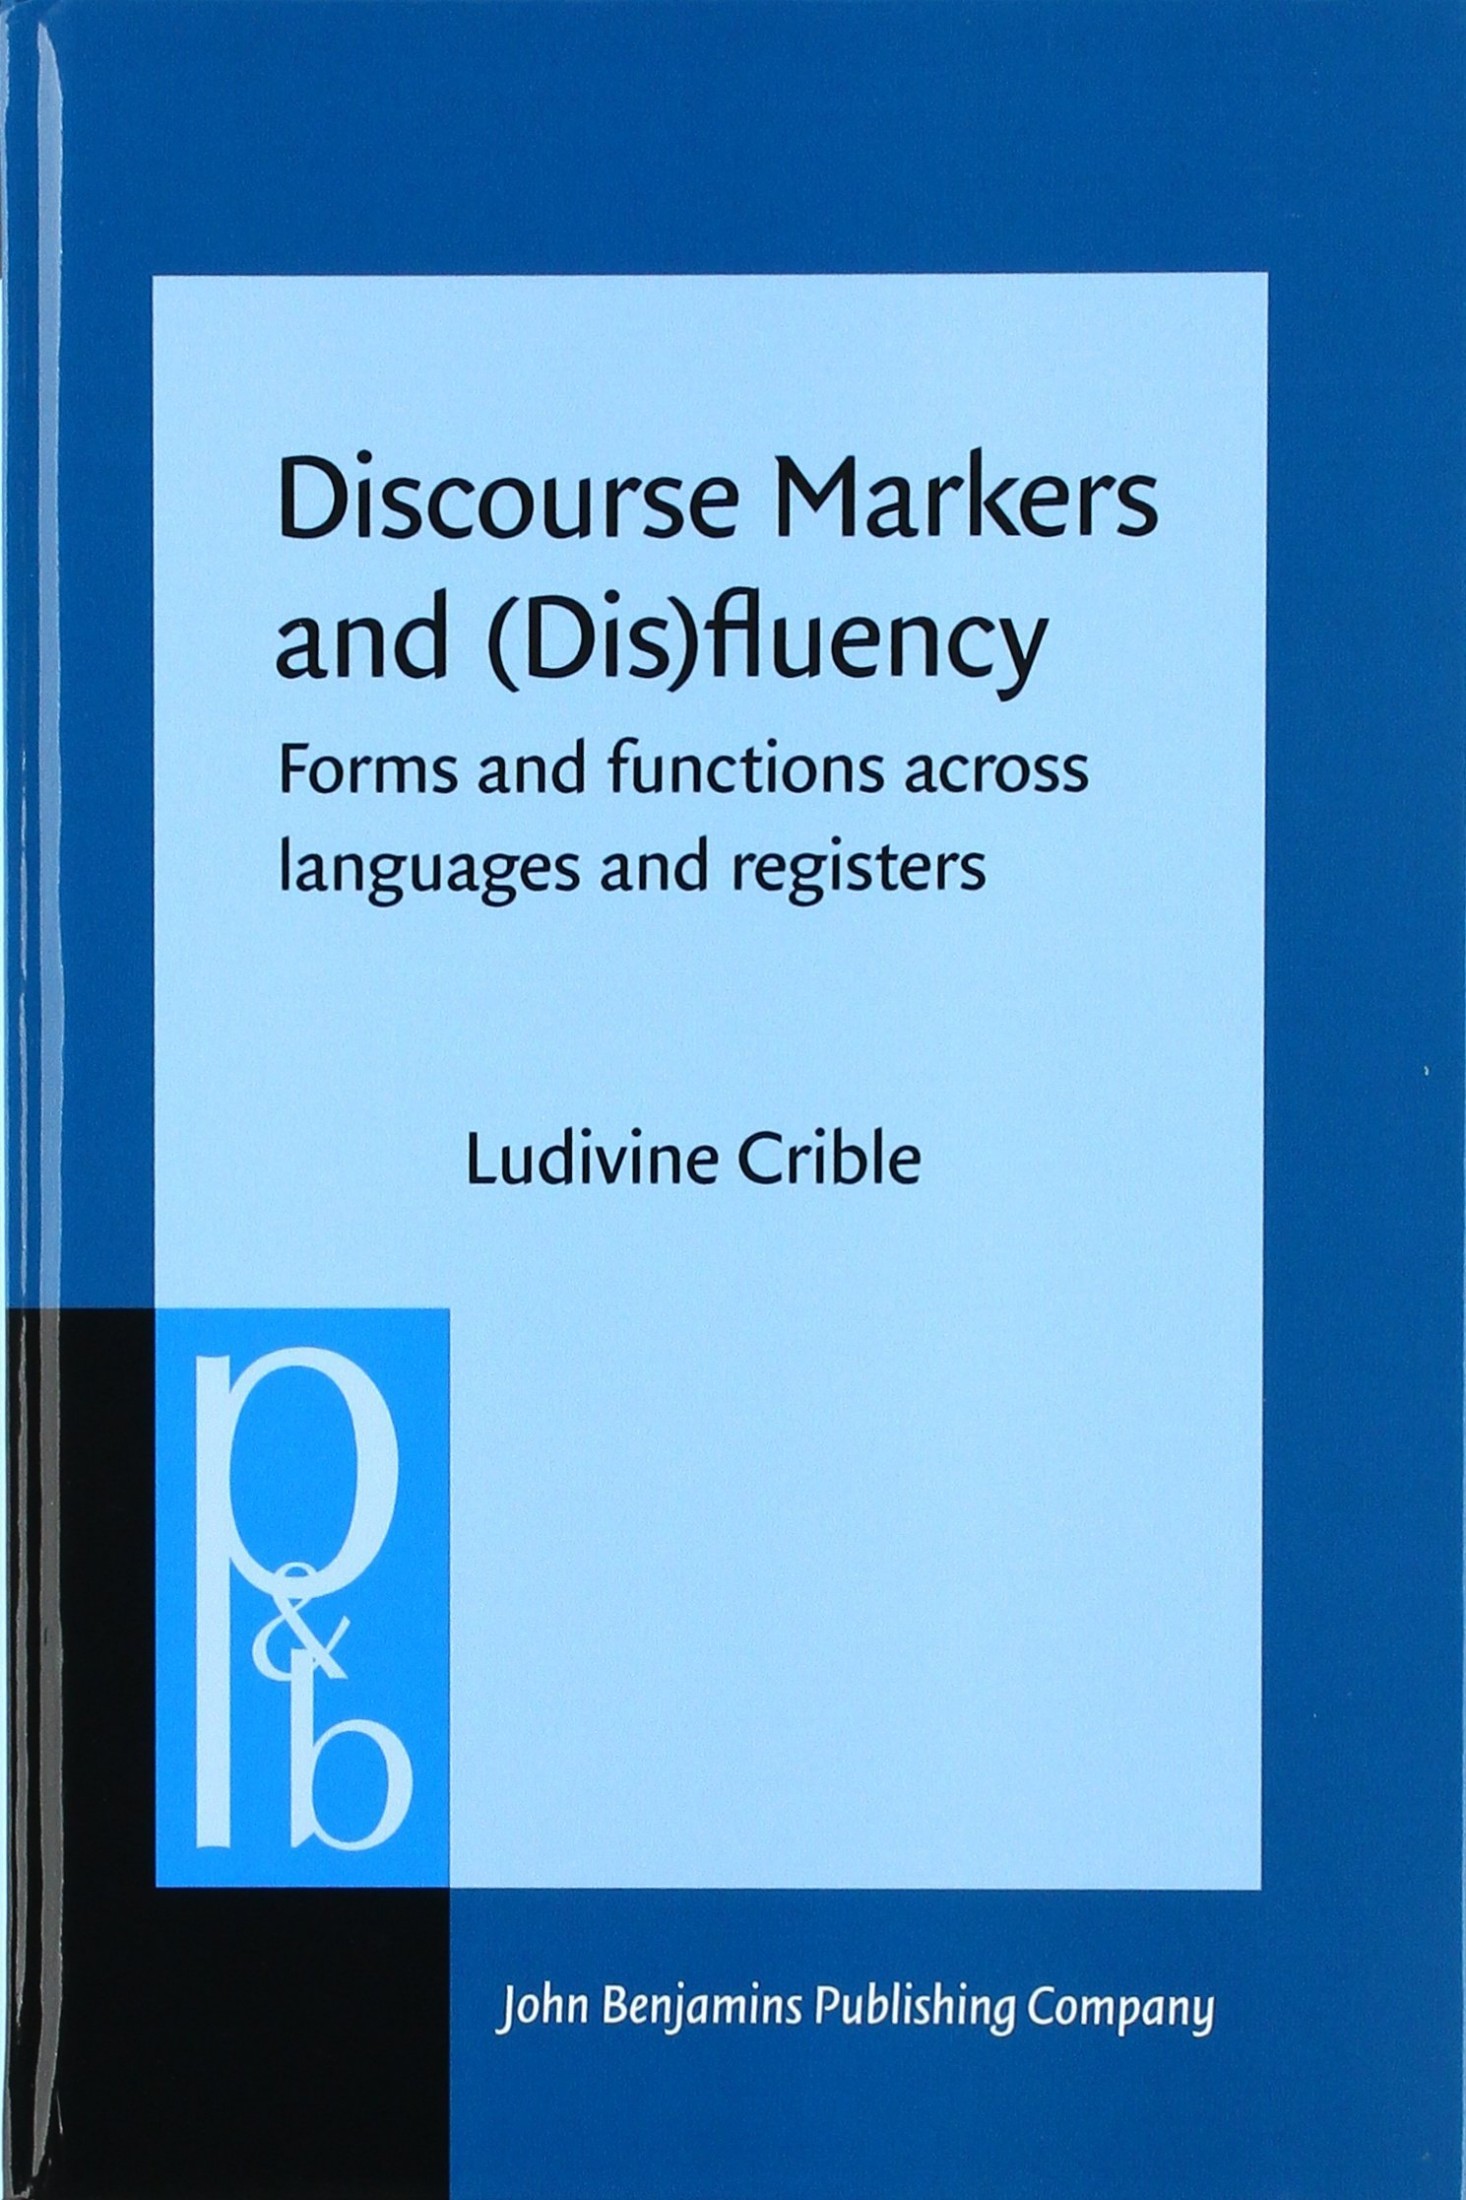 Discourse Markers and (Dis)fluency: Forms and Functions Across Languages and Registers